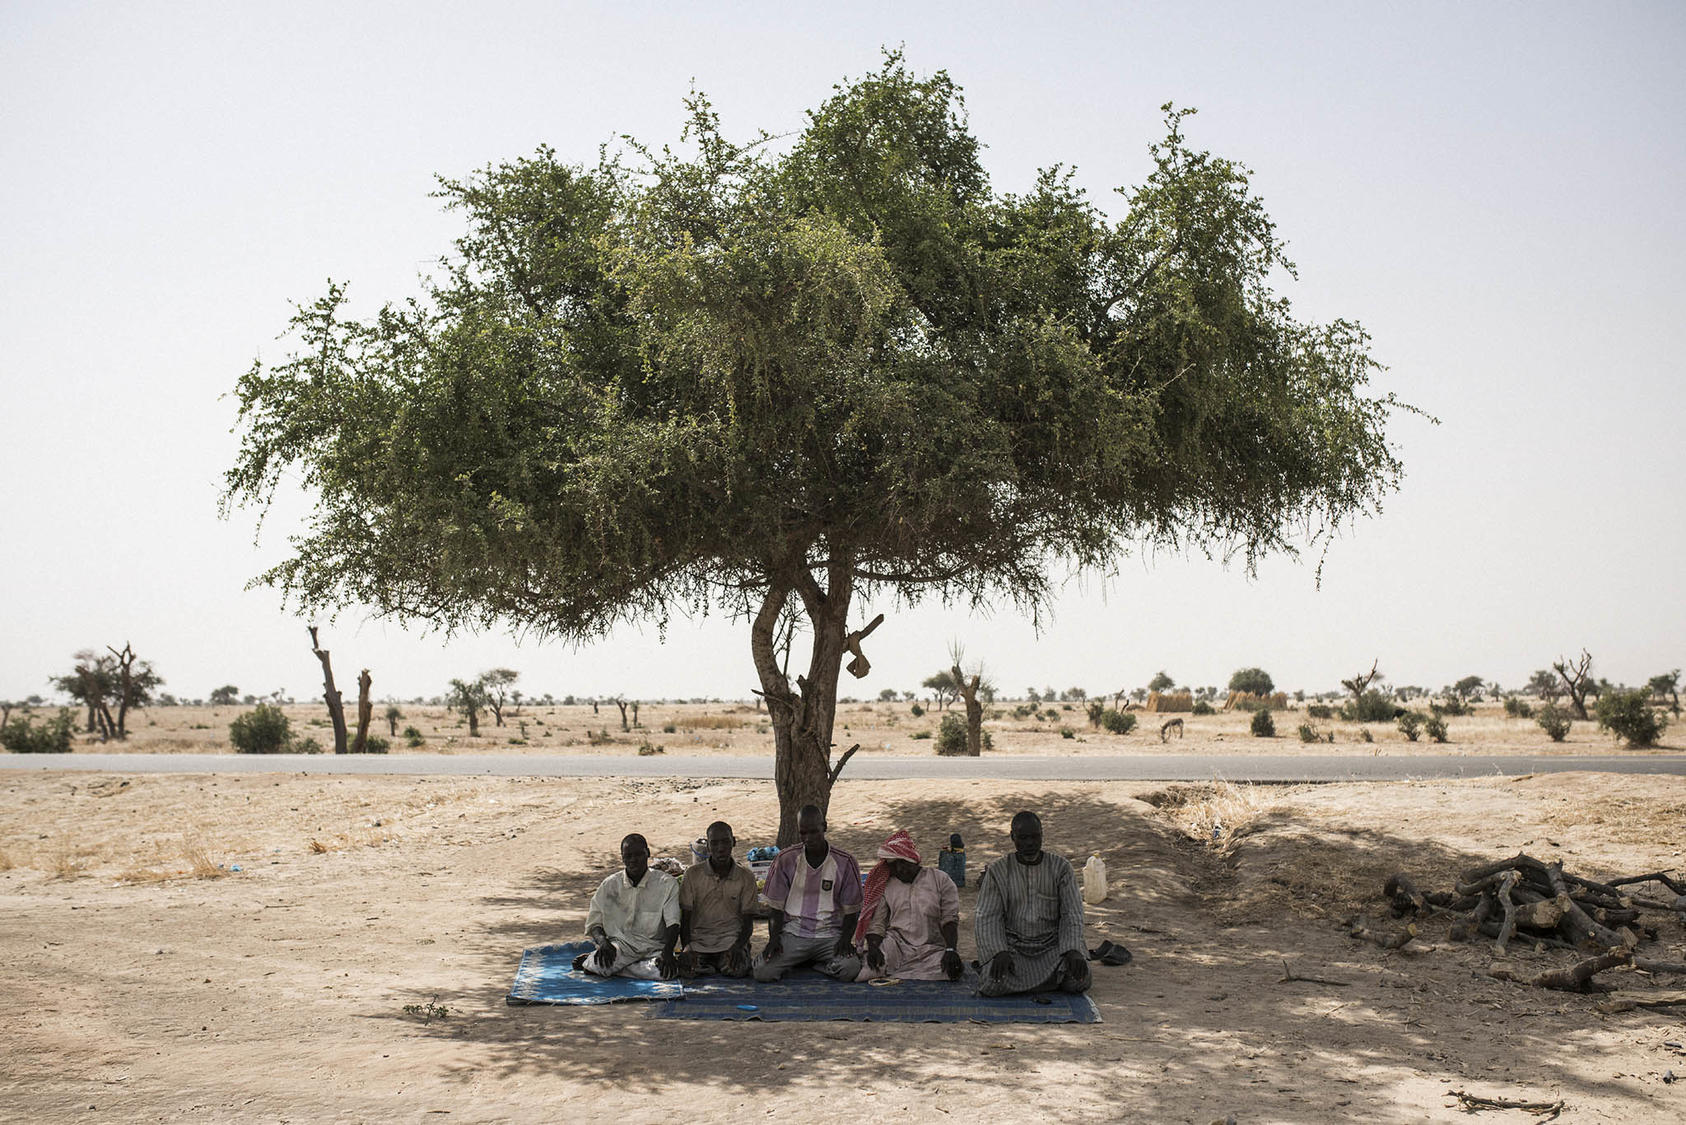 Nigerian men who fled their country’s Boko Haram conflict seek shade to pray in neighboring Niger. Violence involving Boko Haram has uprooted most of the quarter-million Nigerians who have taken refuge in nearby states. (Adam Ferguson/The New York Times)